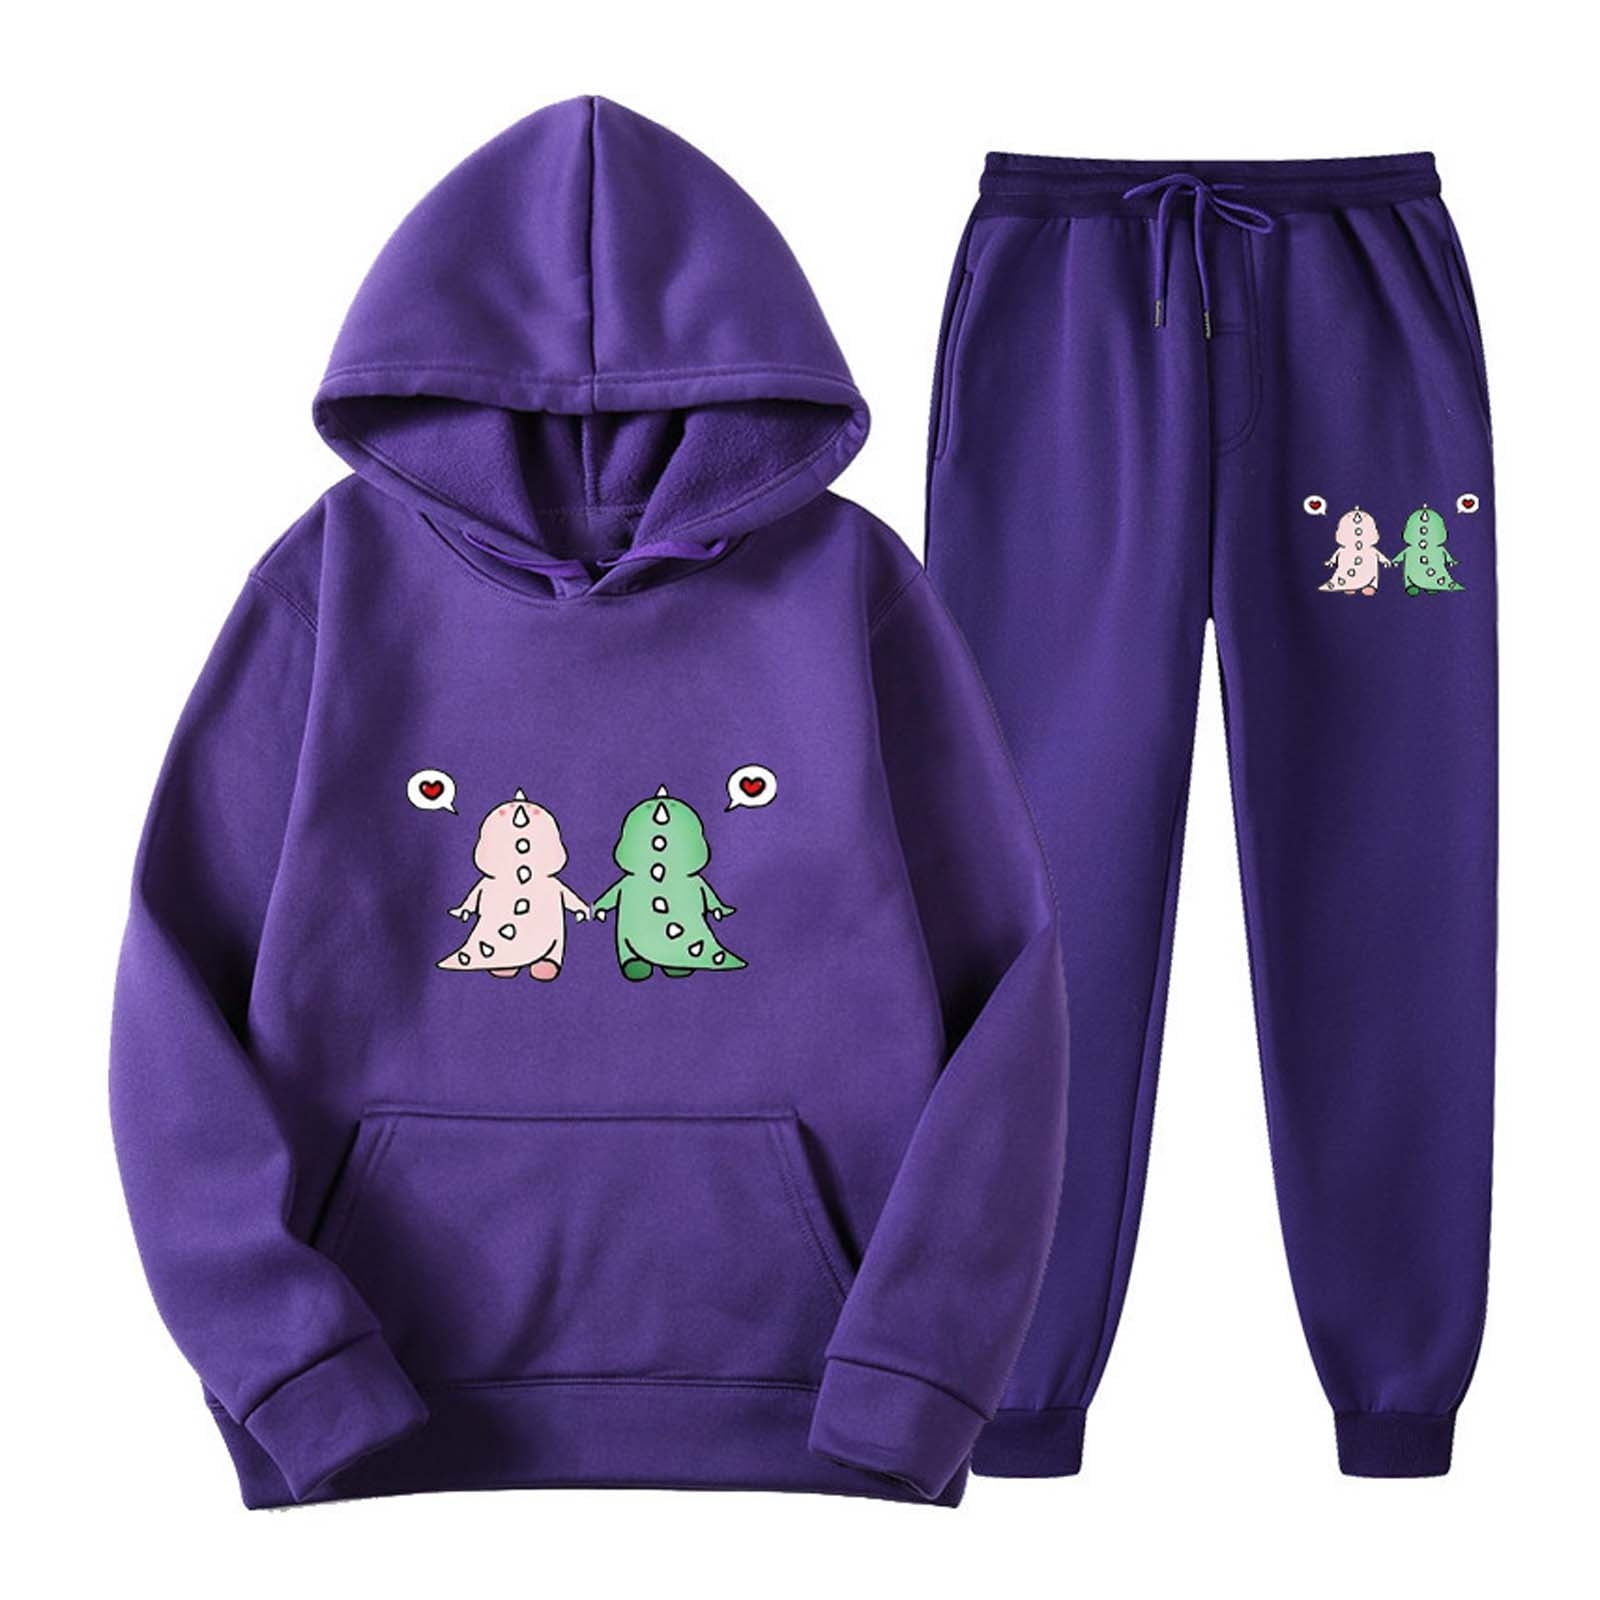 Suit Sweatshirt with Sweatsuits Hoodie Lounge Women Purple Outfits Pullover for Set Reduced RQYYD Sweatpants L Pockets Kangaroo Two Dinosaur Sets Piece